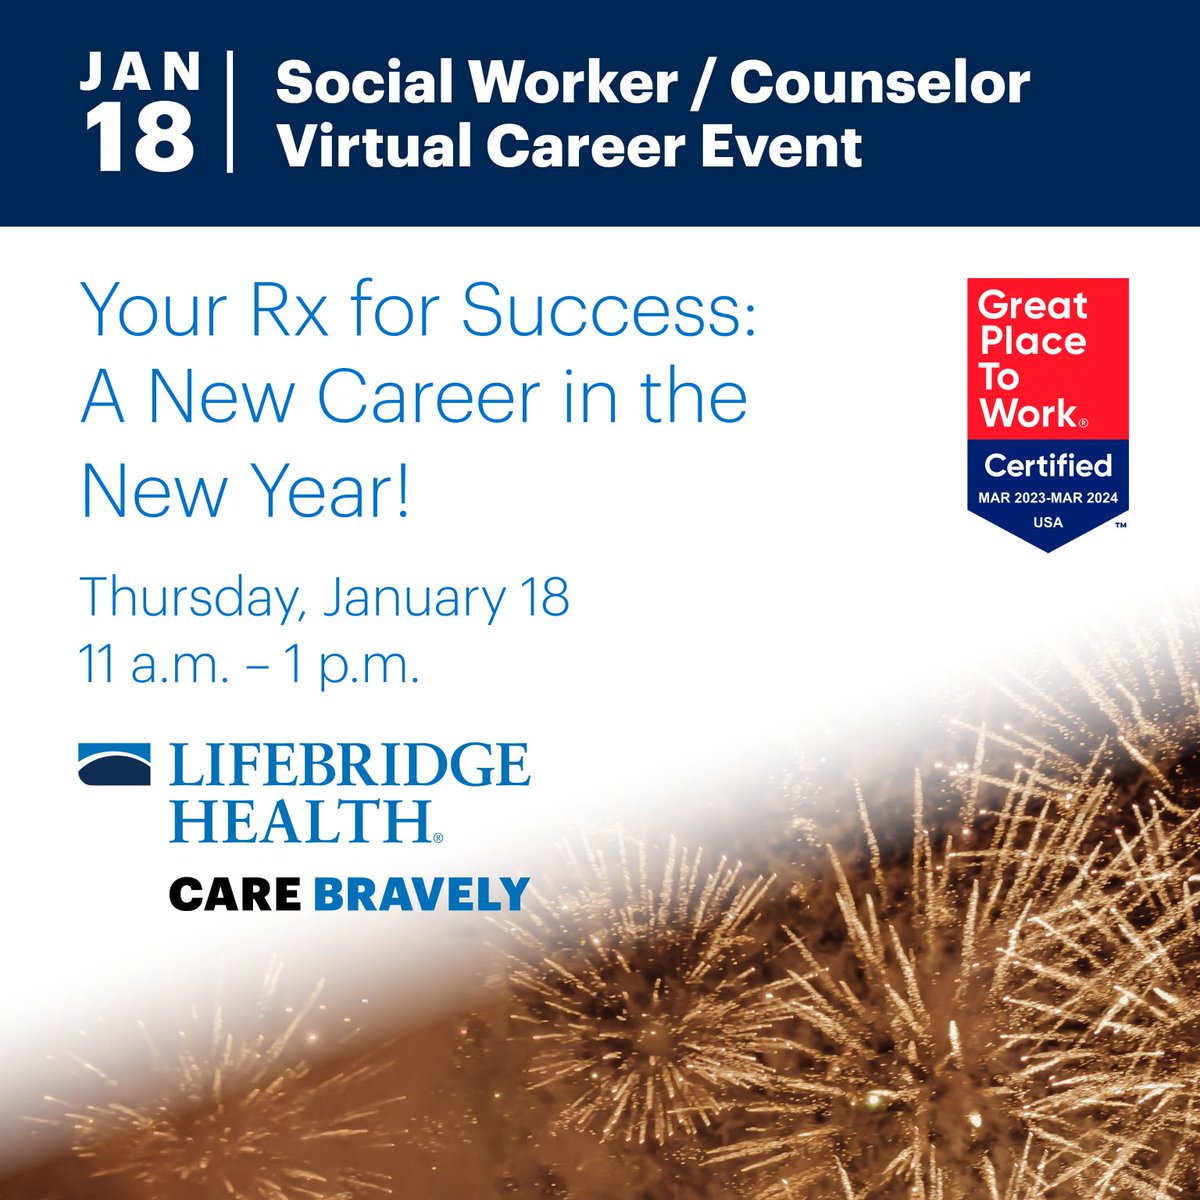 📣📣Upcoming hiring event

📍@LifeBridgeHealth is hosting a virtual career event for social work and counseling positions
⏰this Thursday, Jan. 18 from 11 a.m. - 1 p.m.

📱Learn more and register here: app.brazenconnect.com/events/Jn3oO

#Maryland #jobs #Marylandjobs #socialwork #counselors